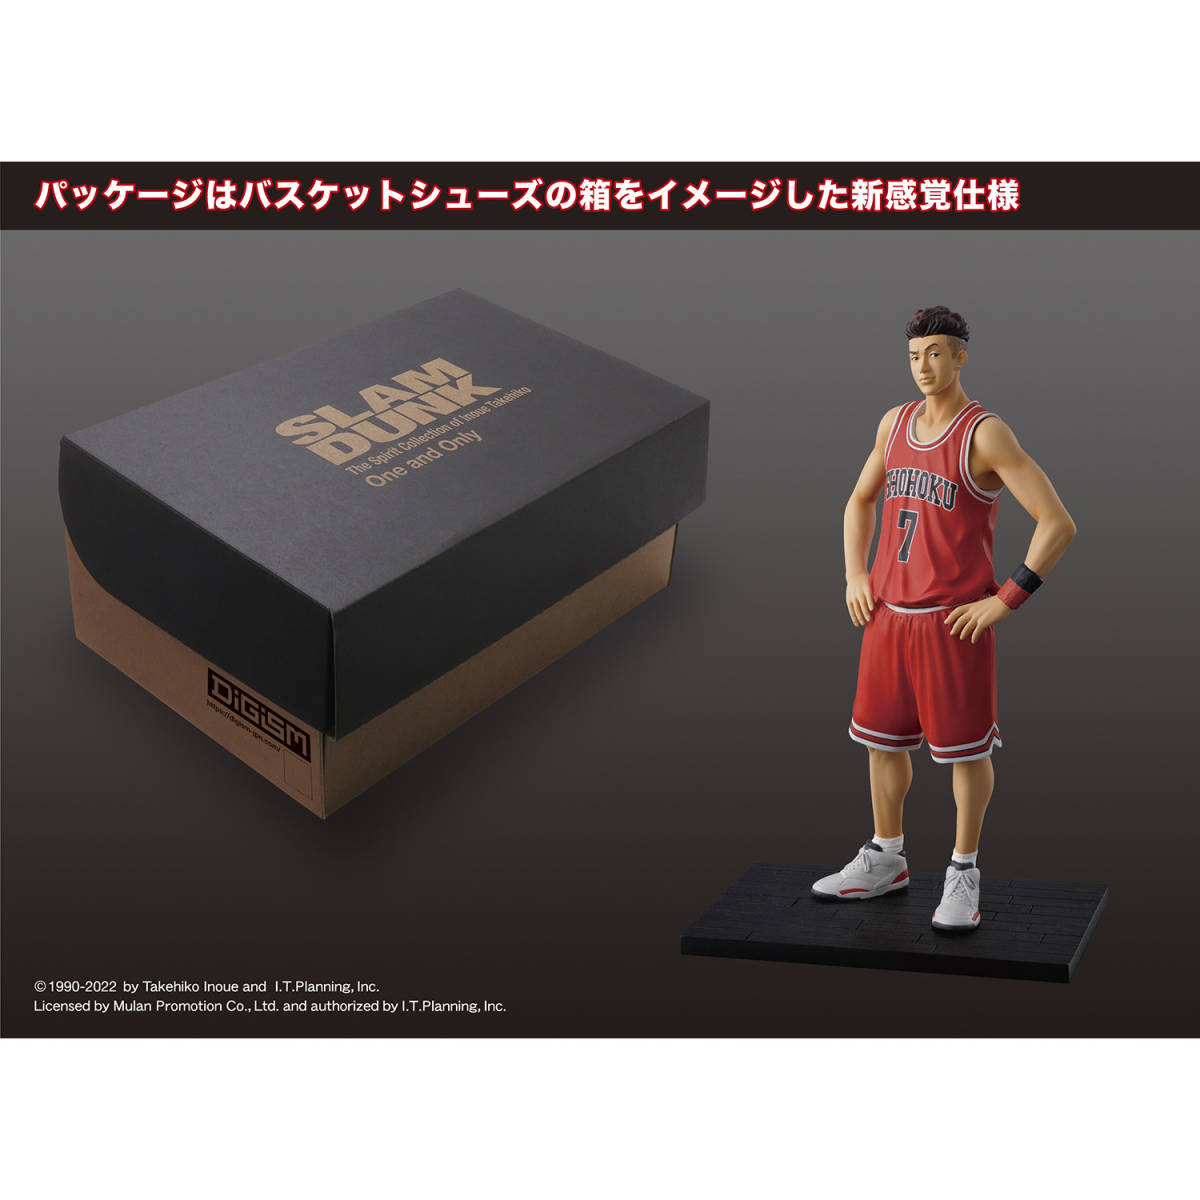 DiGiSM One and Only 『SLAM DUNK』 宮城 リョータ　全高約146mm　スラムダンク THE FIRST SLAM DUNK 湘北　スラダン　即決_画像2